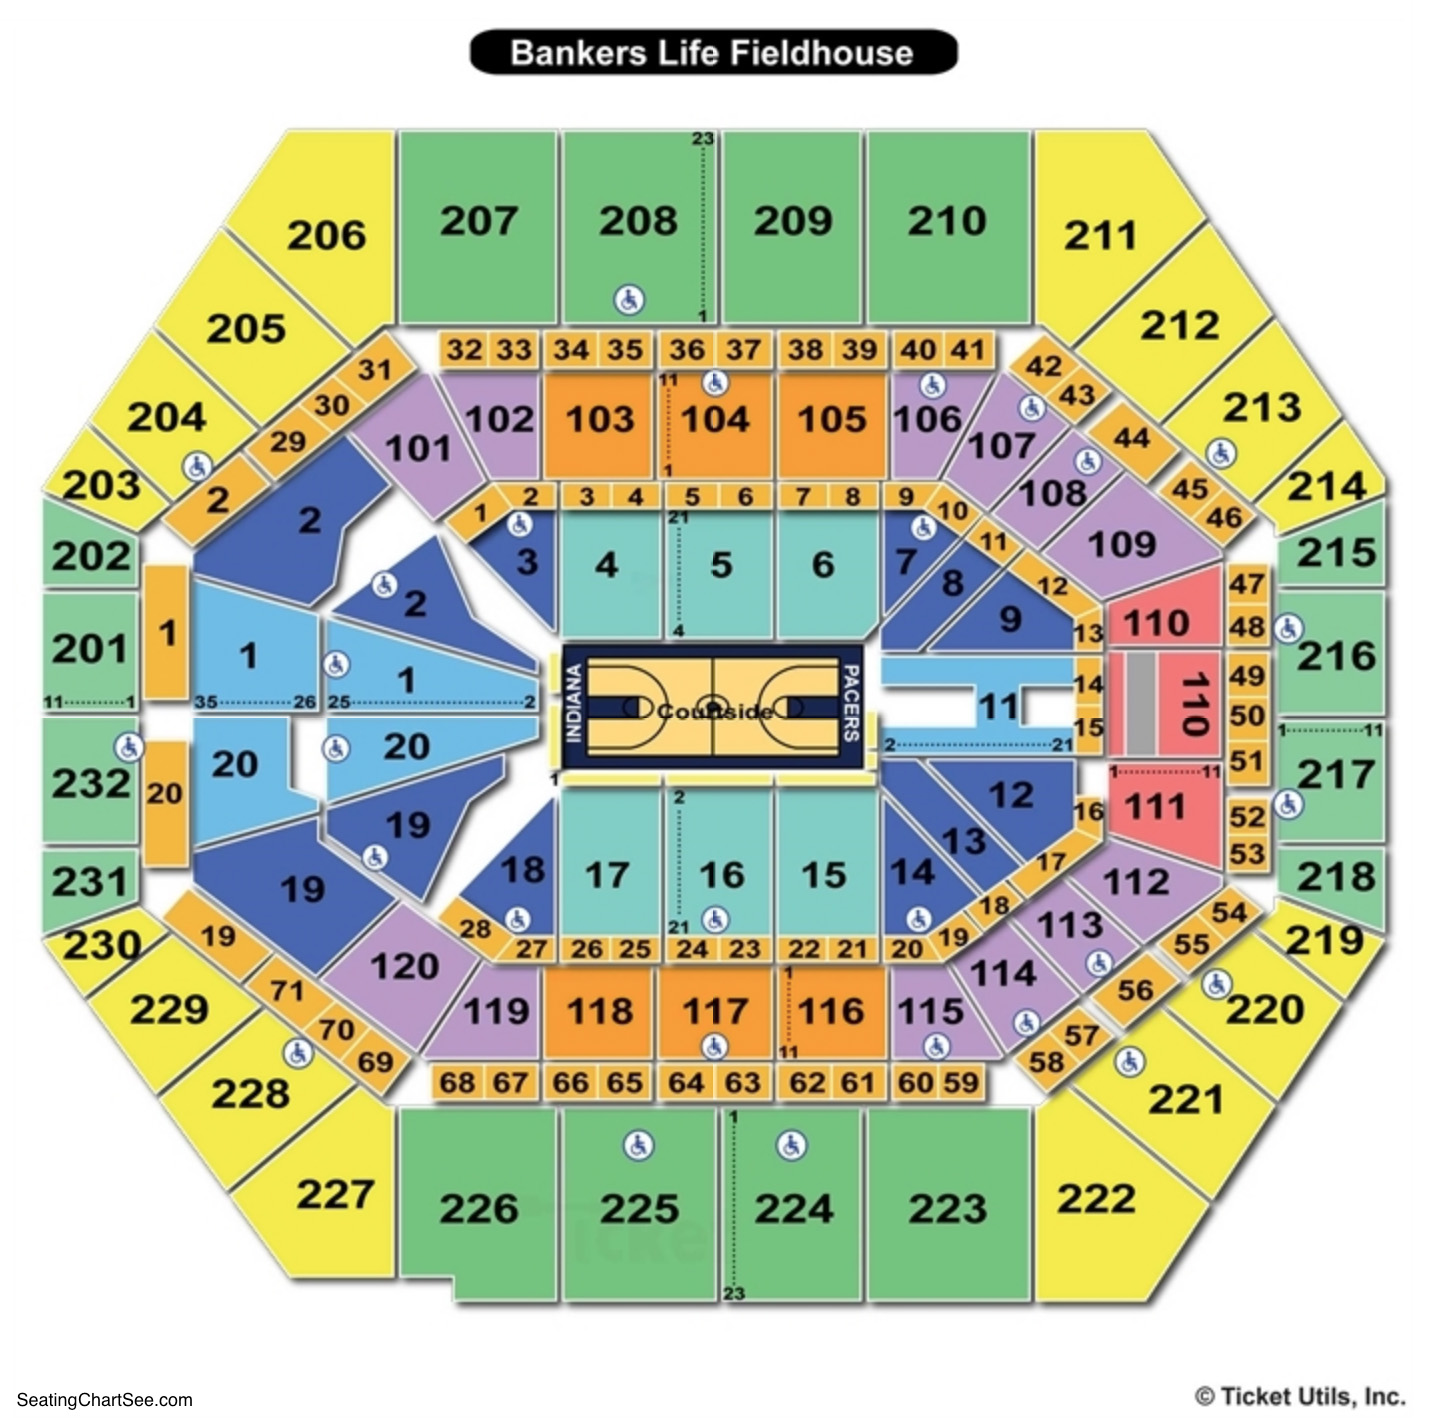 Bankers Life Fieldhouse Seating Charts